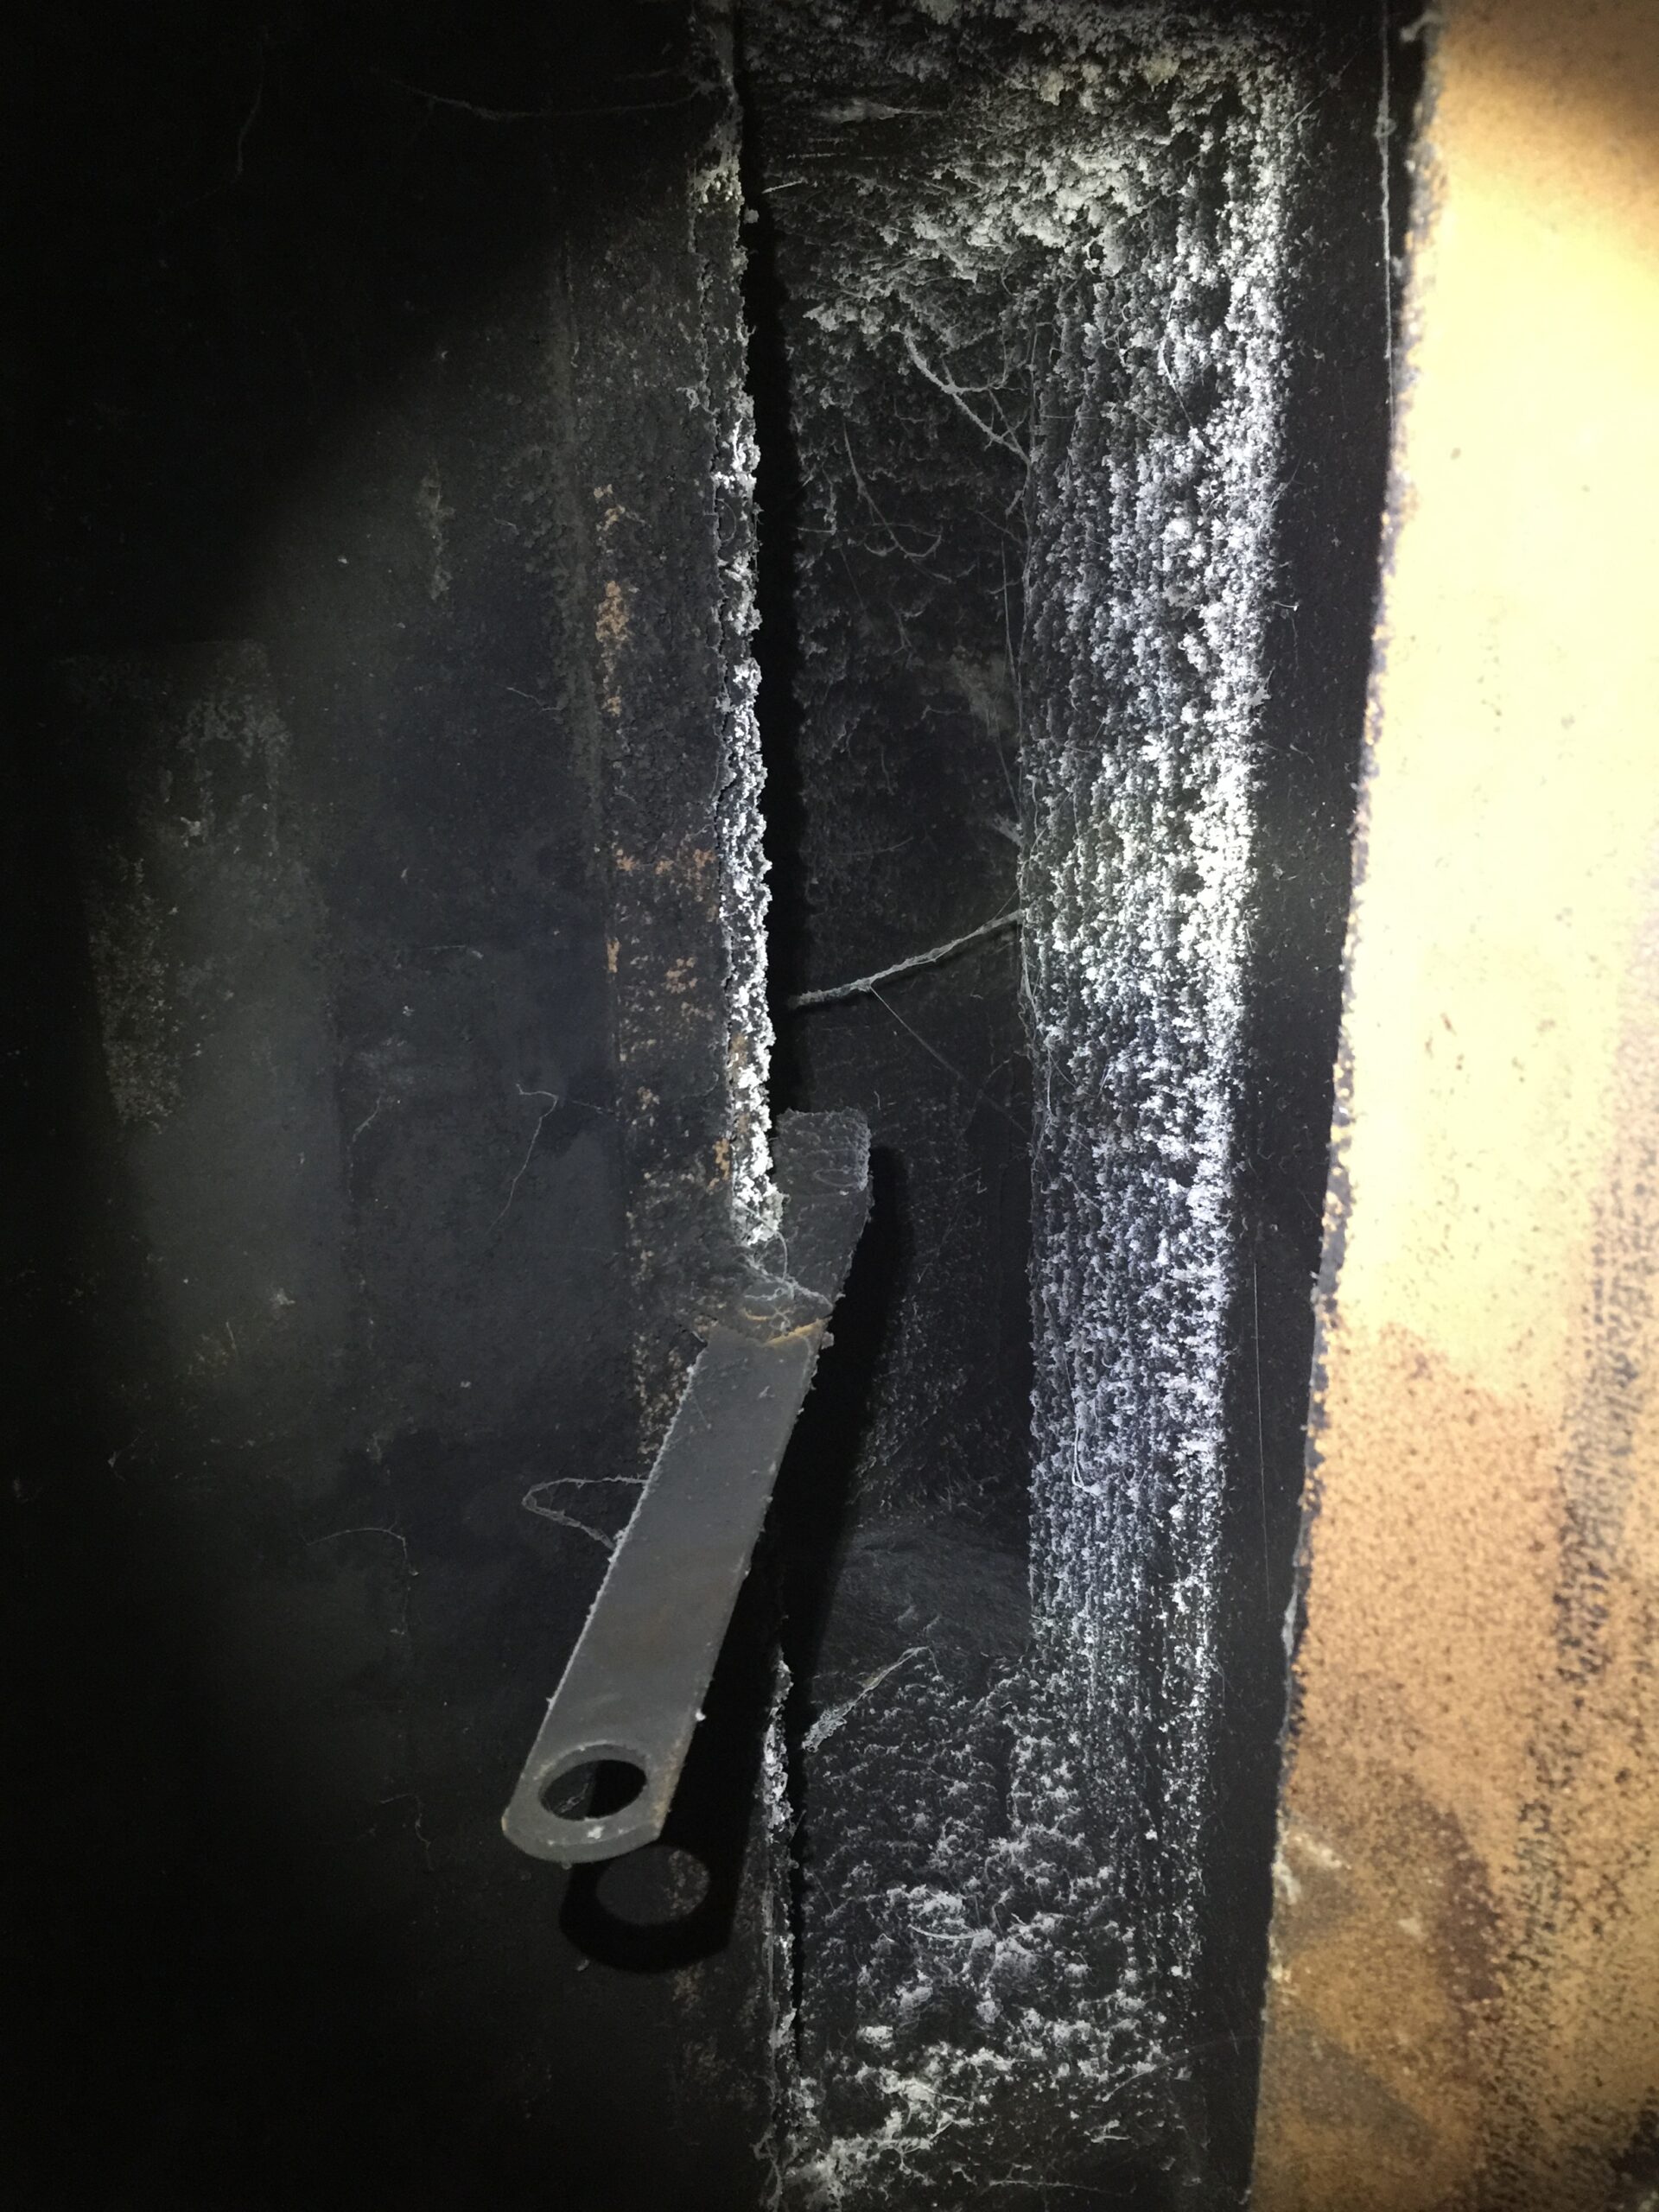 Chimney flue before being cleaned by A-1 Duct Cleaning & Chimney Sweep in Orange County, CA